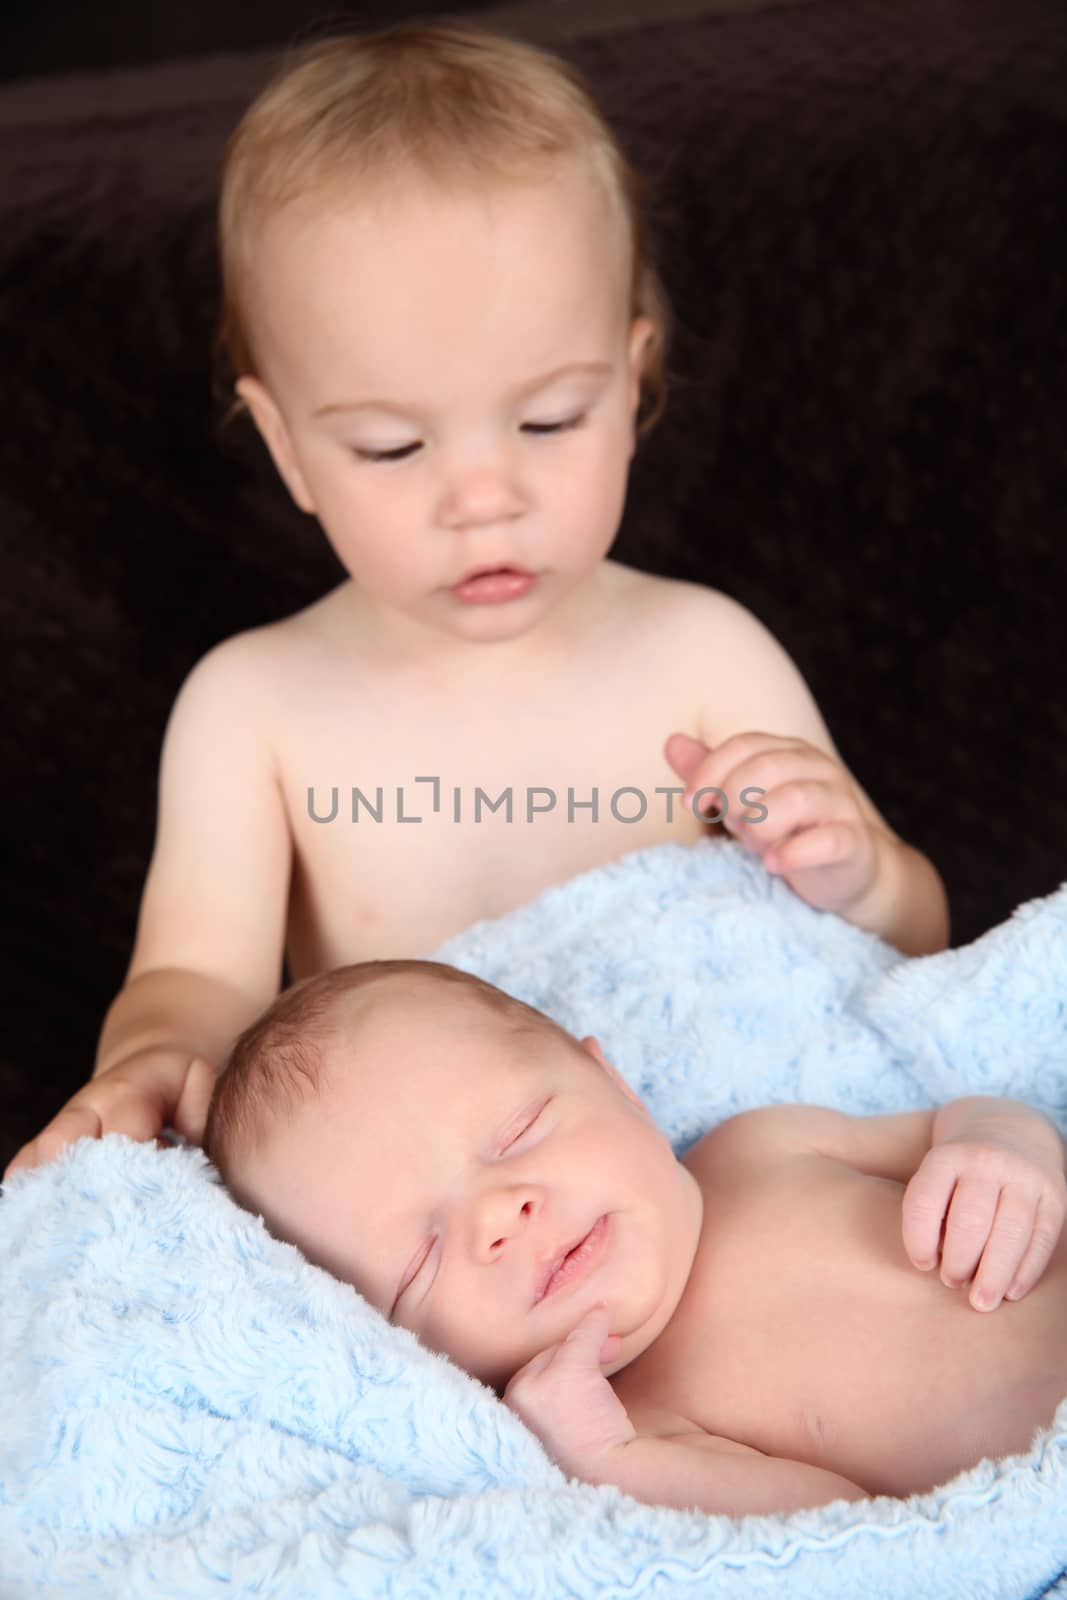 Toddler boy with his newborn baby brother